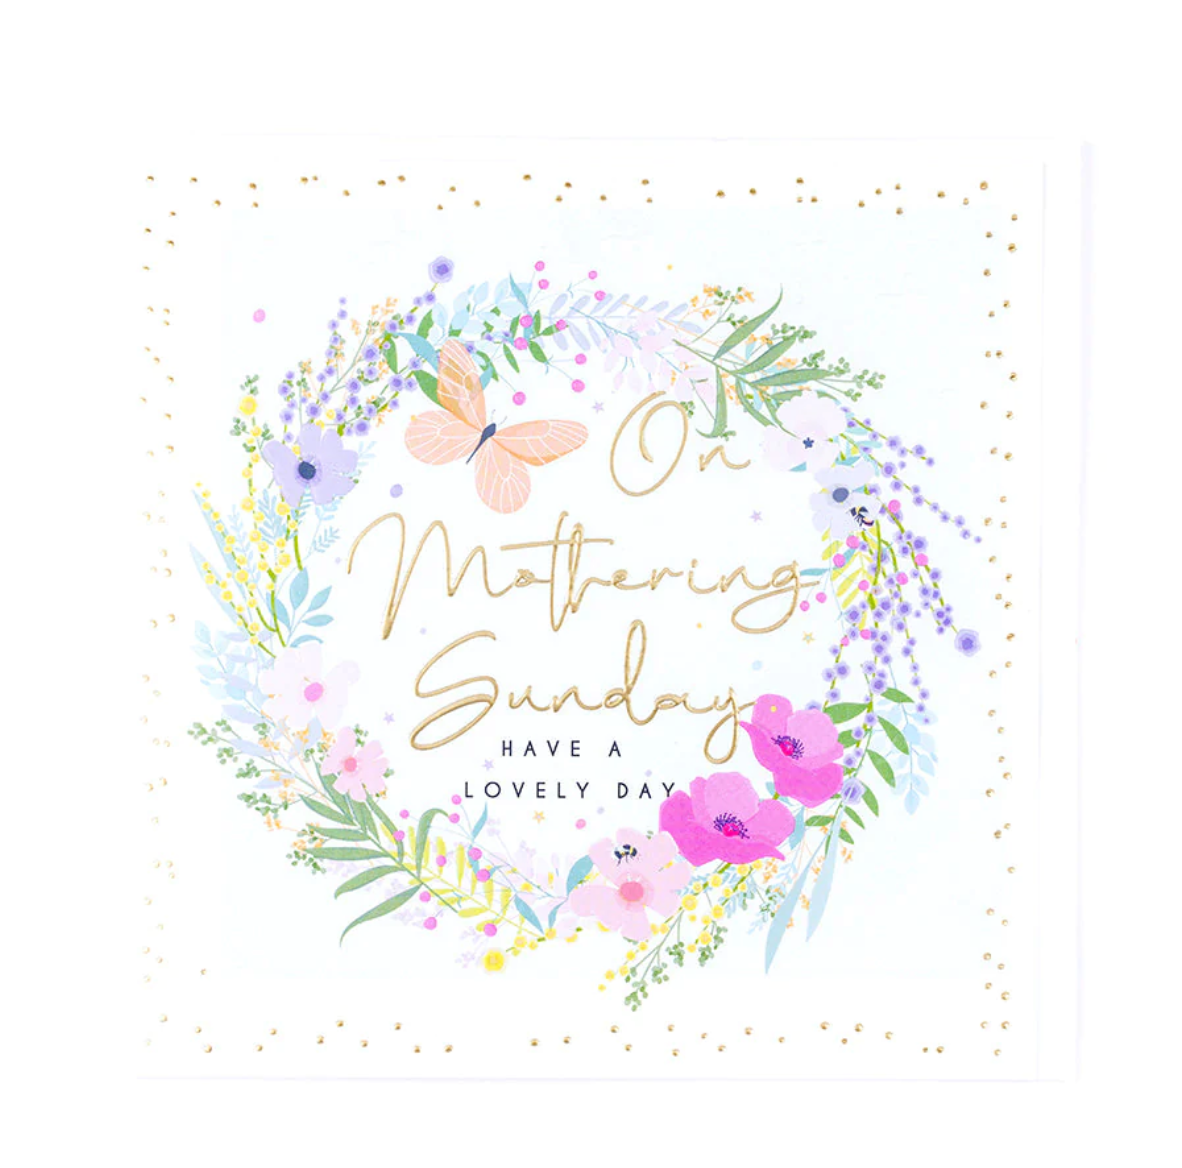 Belly Button On Mothering Sunday Have a Lovely Day Floral Wreath Large Card